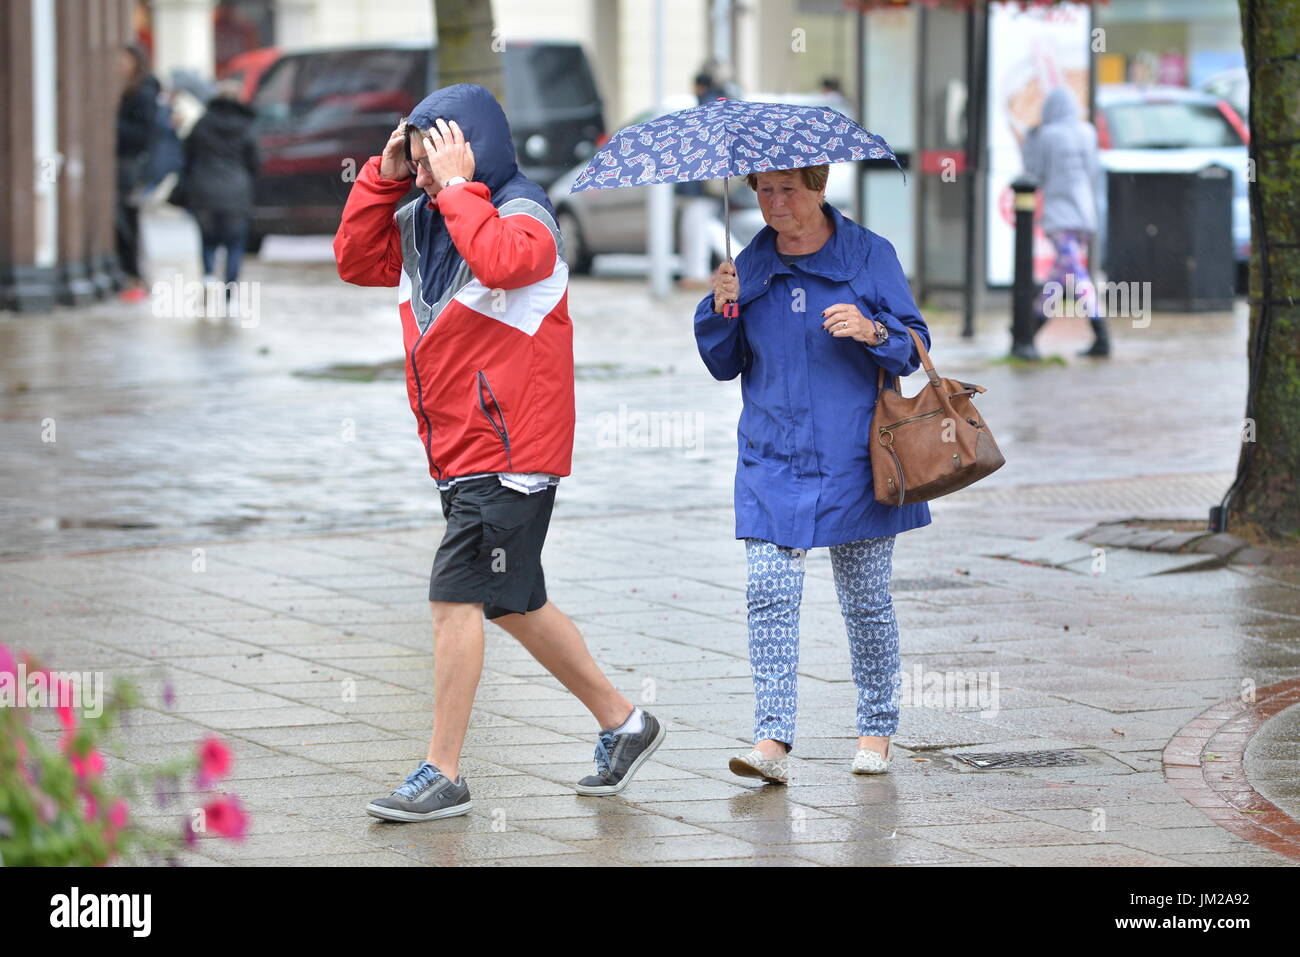 Worthing, West Sussex, England, UK. Wednesday 26th July 2017. People shopping in the rain in Worthing this morning, as the day starts cold and wet, with no sign of letting up in the south of England. Credit: Geoff Smith / Alamy Live News. Stock Photo